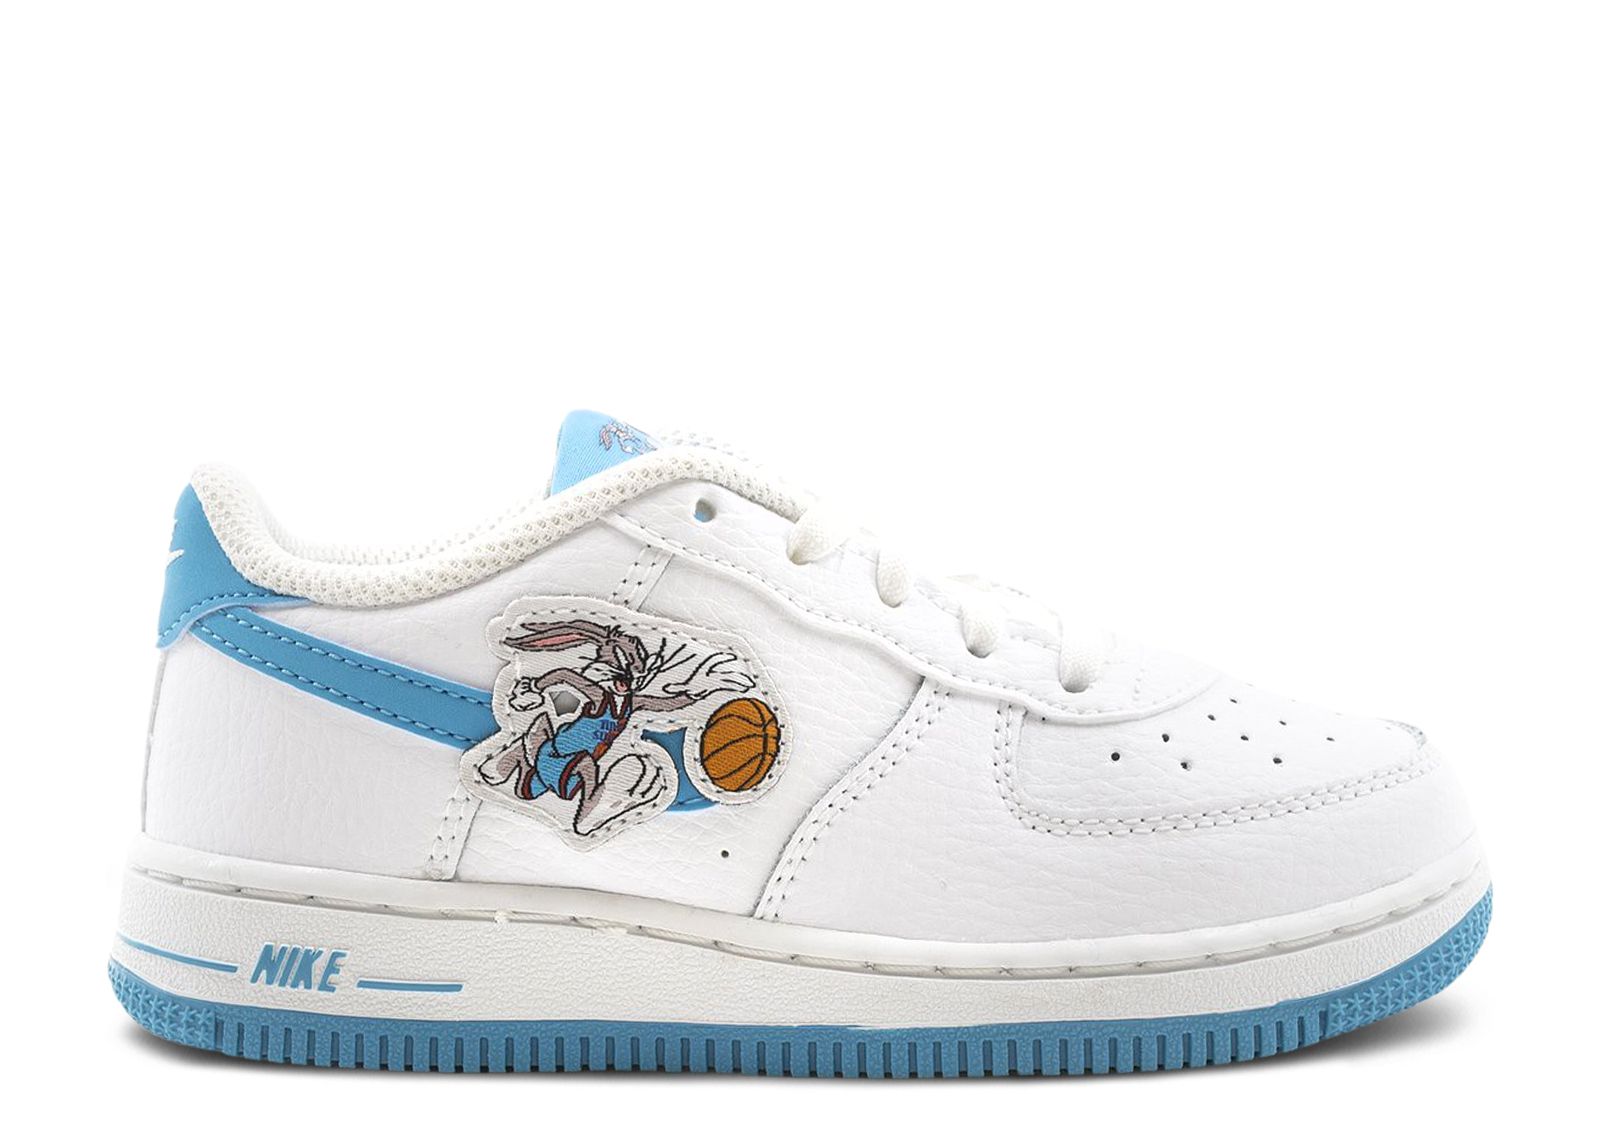 kristian giles brothers fury Кроссовки Nike Space Jam X Air Force 1 '06 Td 'Hare', белый